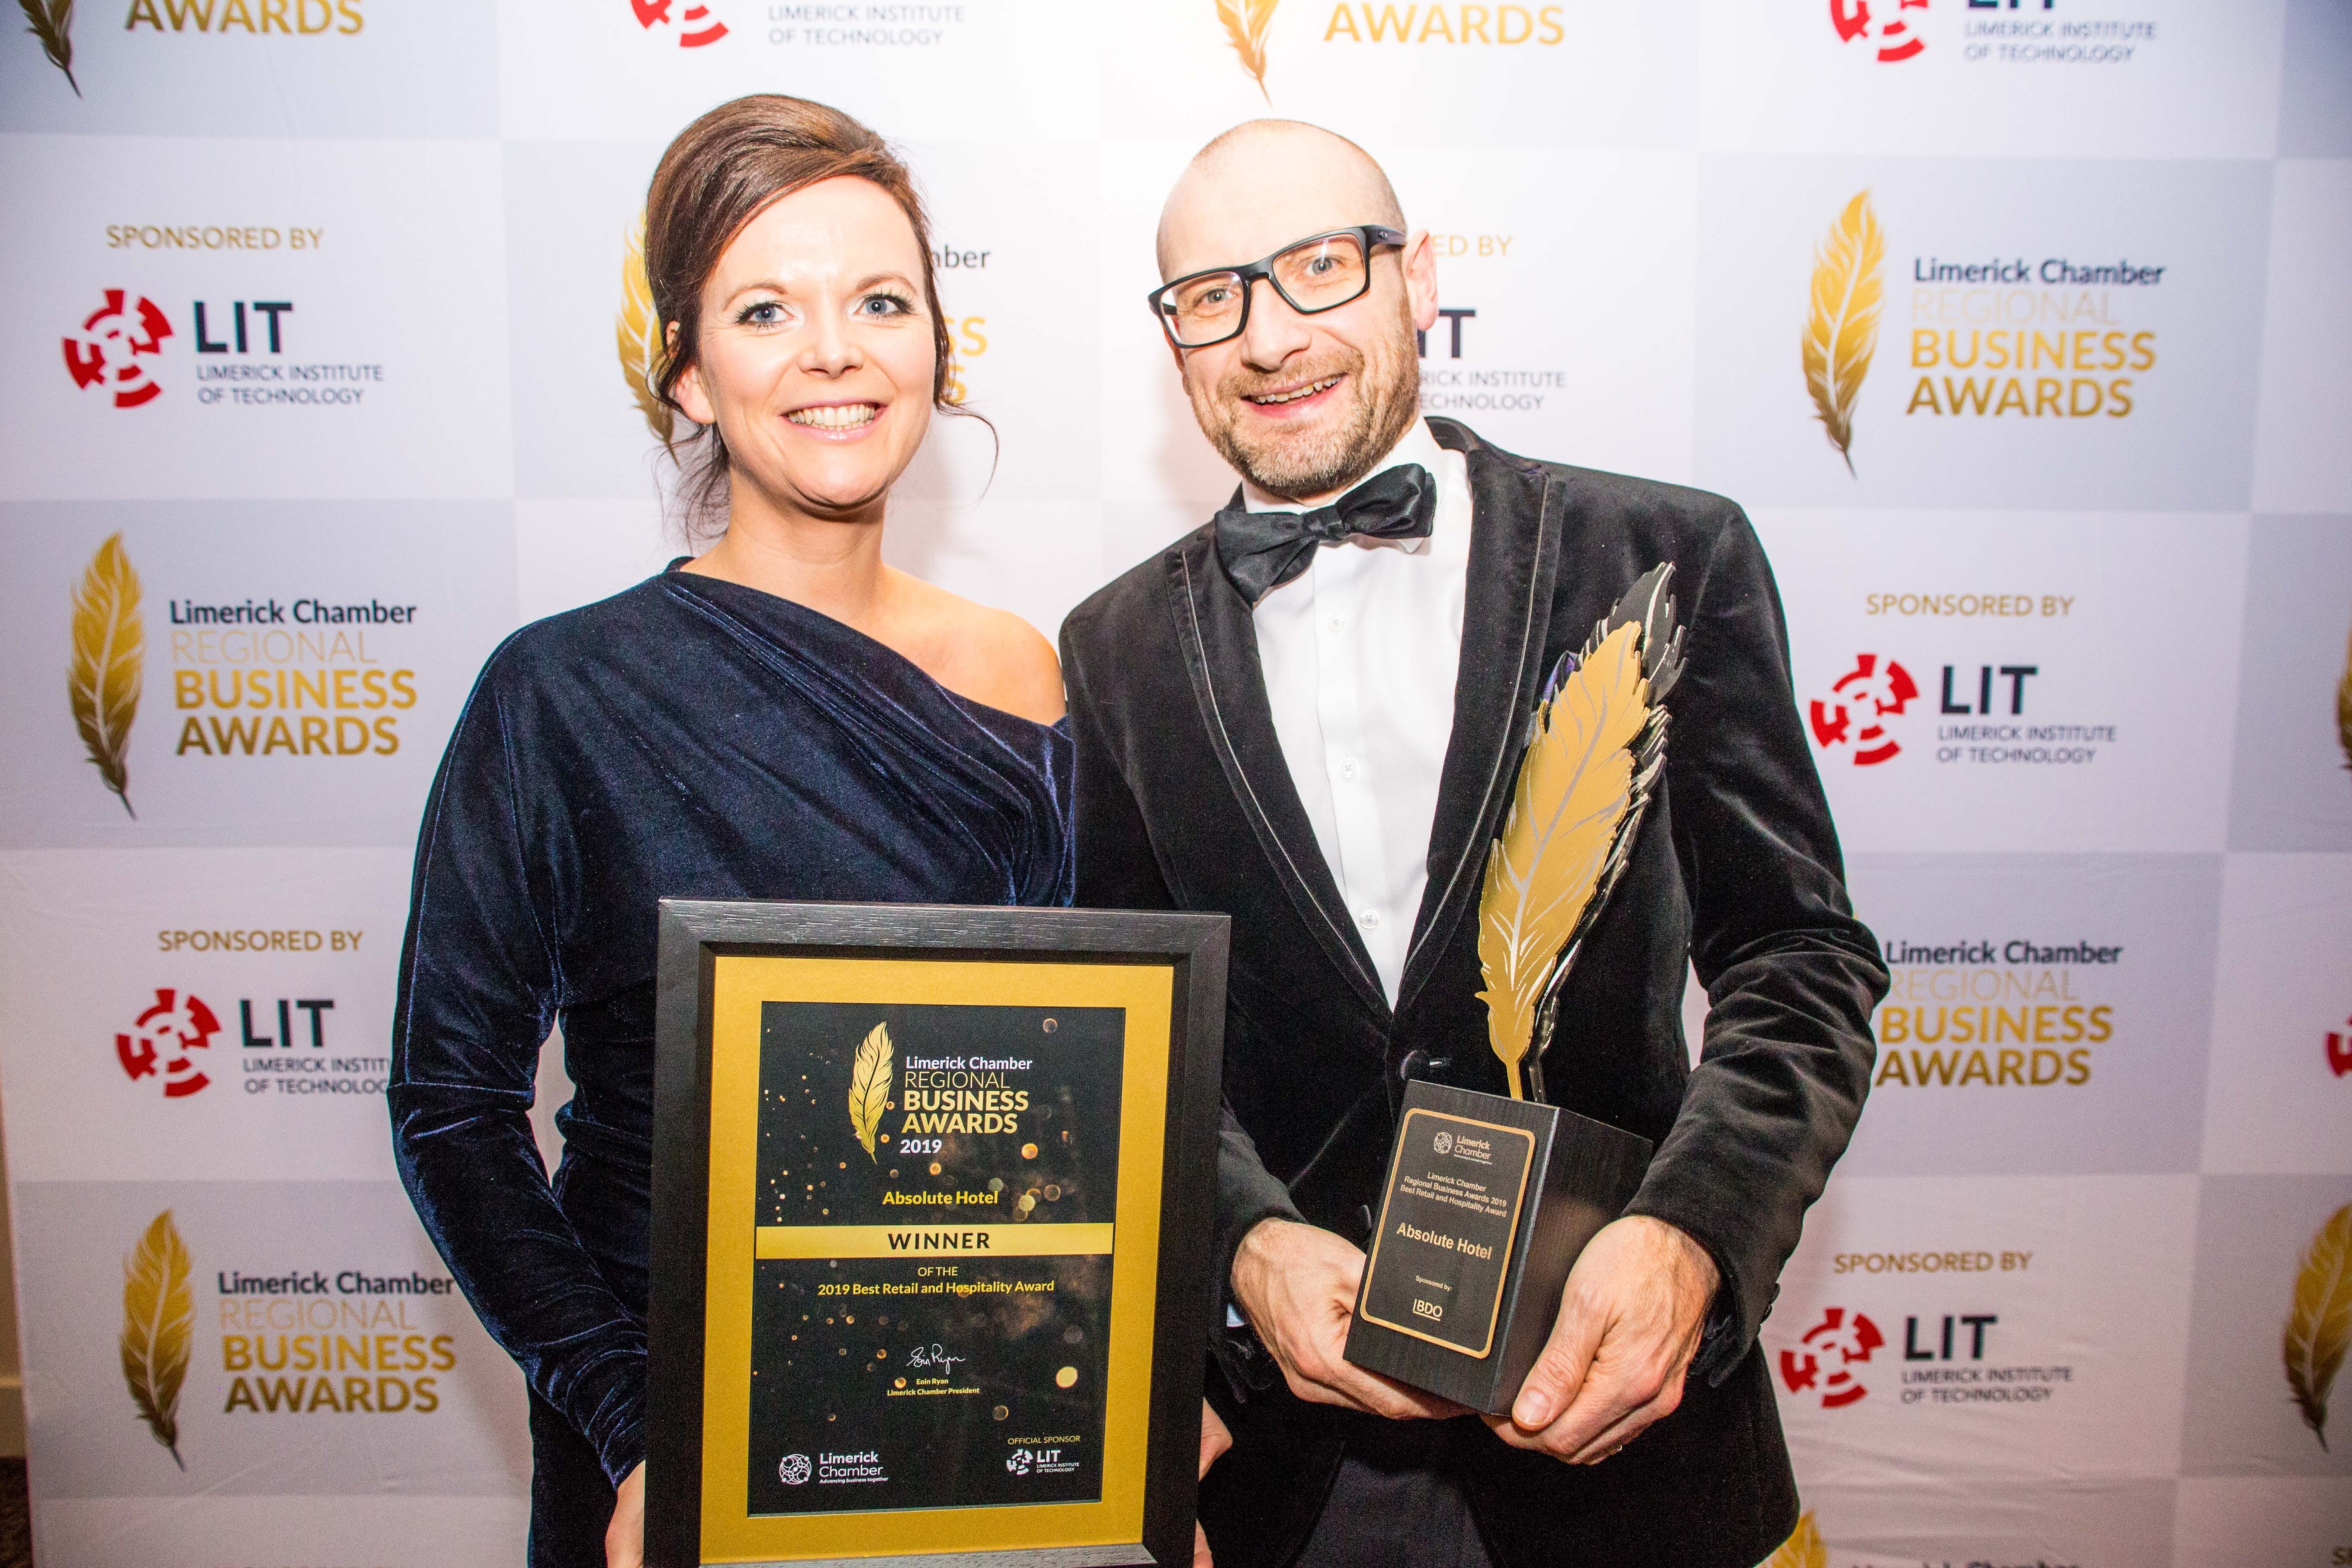 Melanie Lemon and Donacha Hurley of the Absolute Hotel pictured with their award for Best Retail and Hospitality at the Limerick Chamber President's Dinner. Photo: Cian Reinhardt